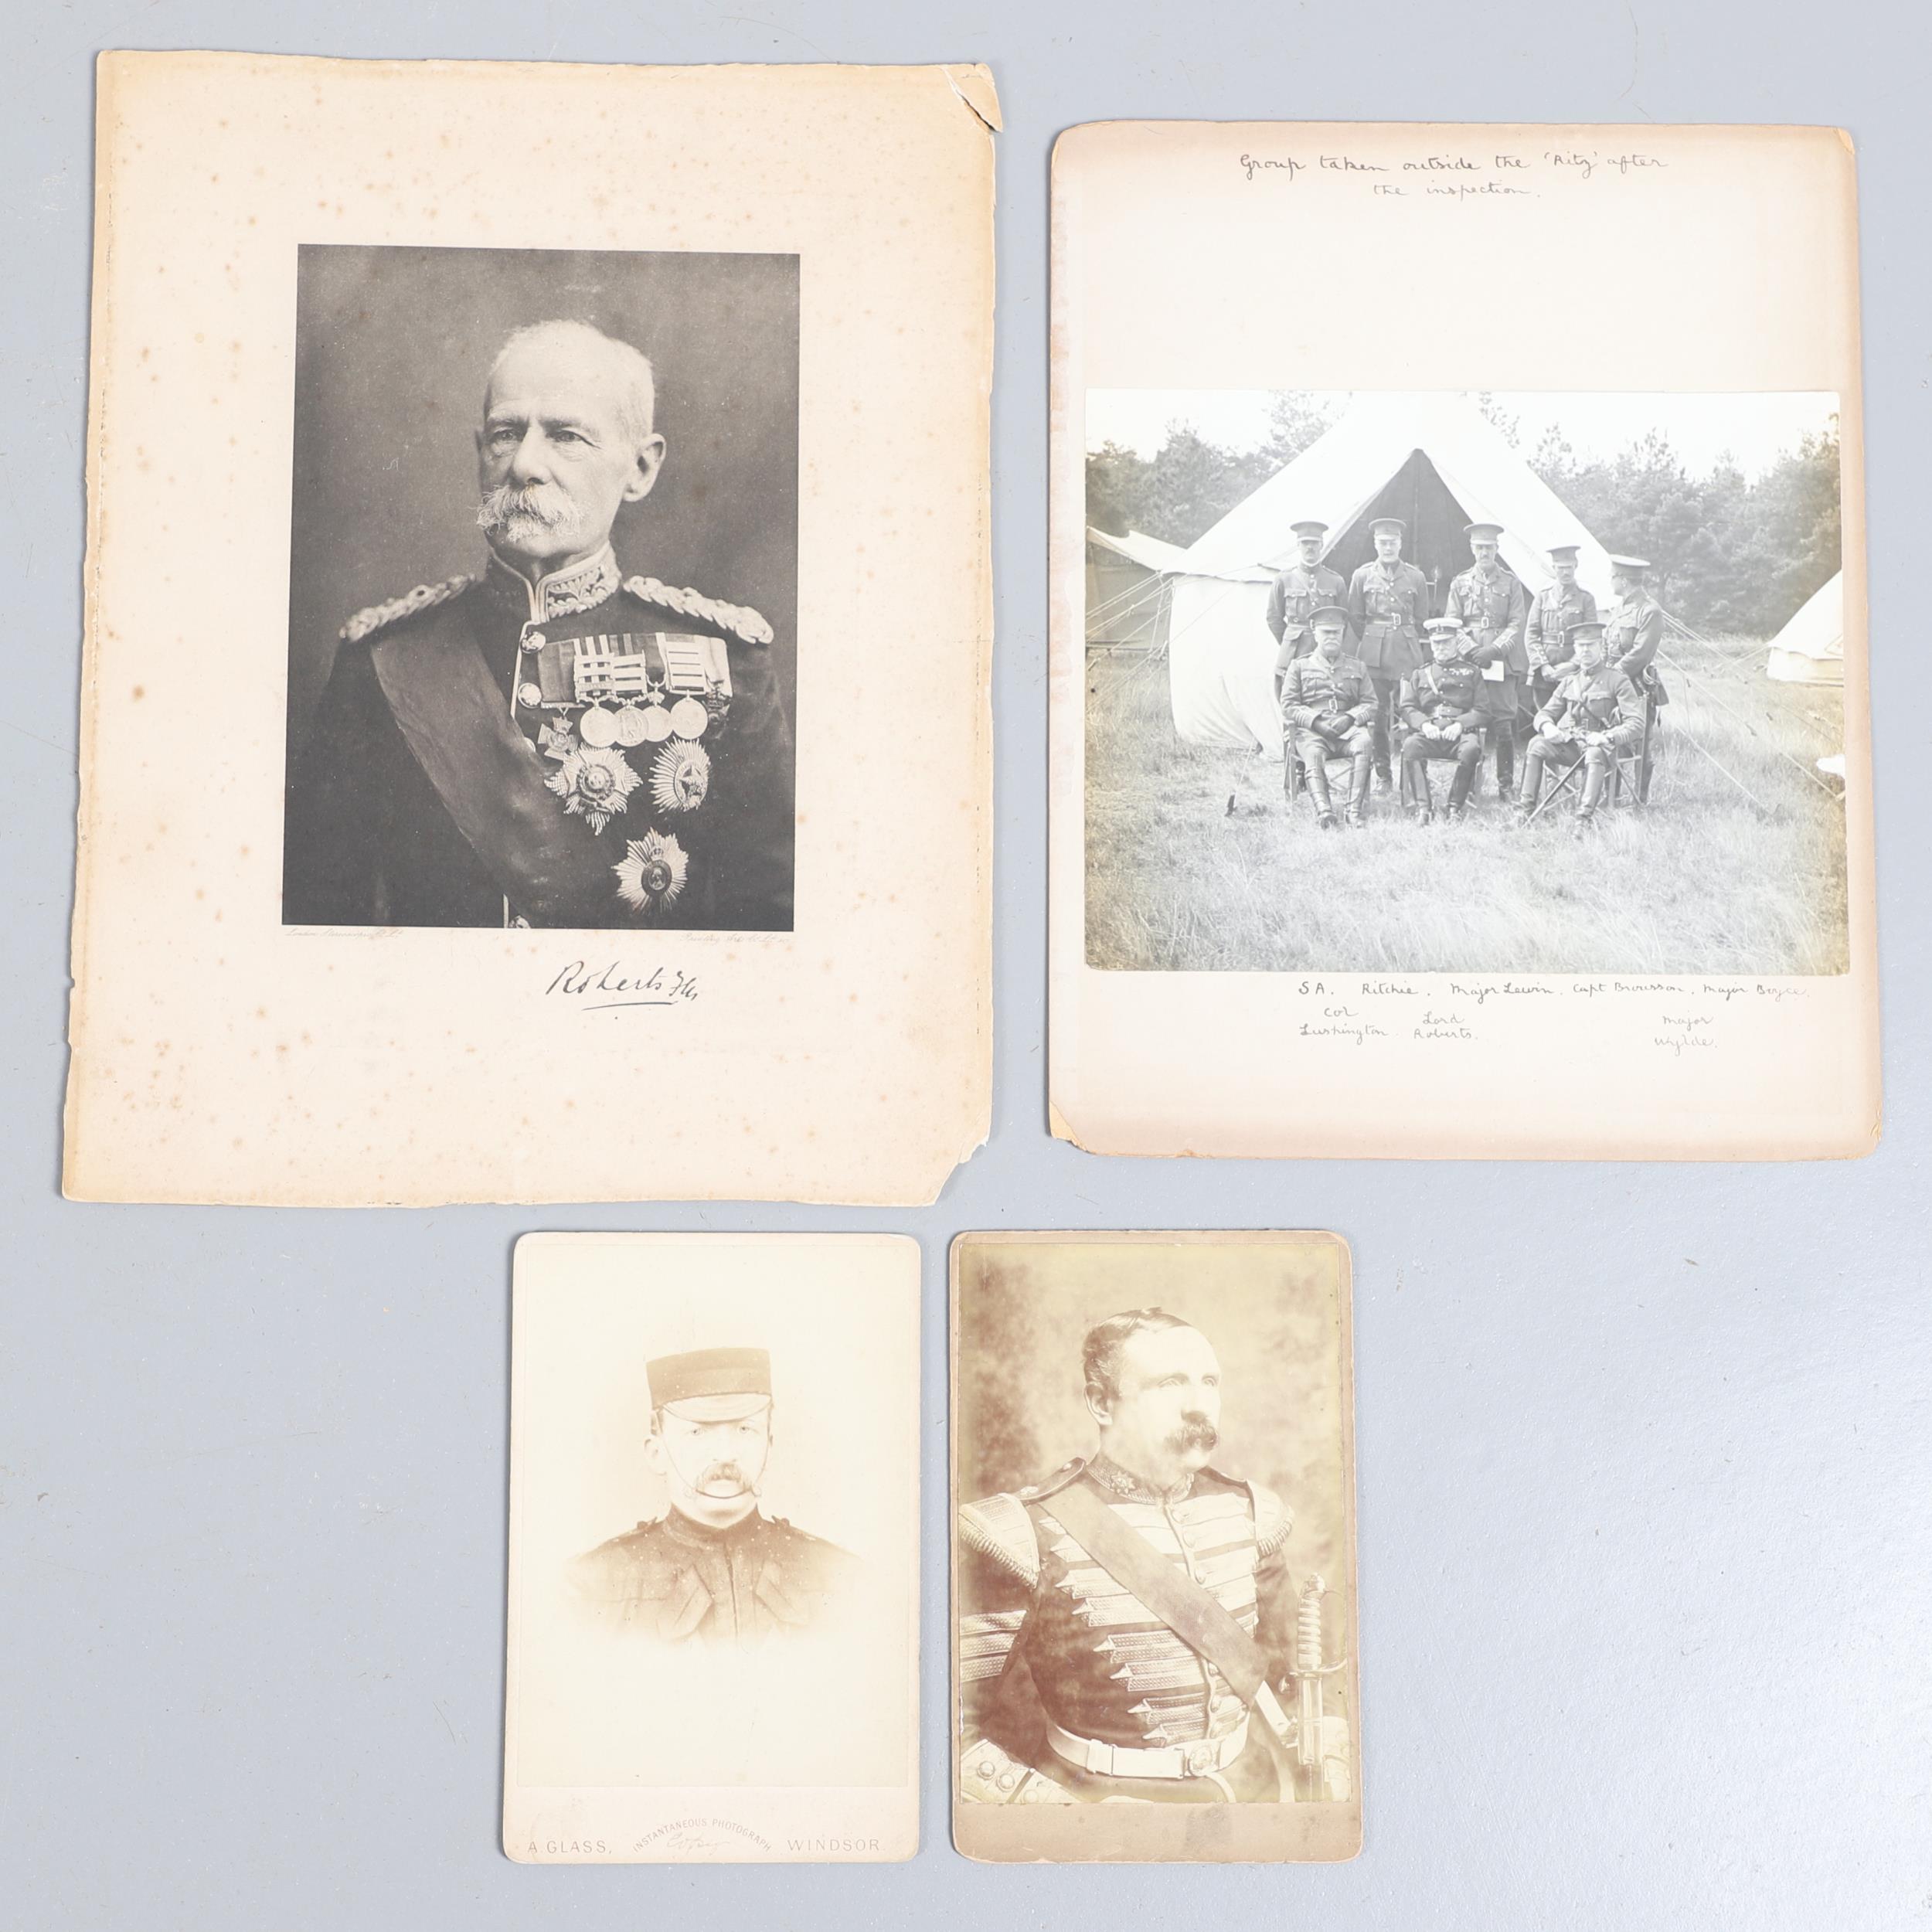 A PHOTOGRAPH OF LORD ROBERTS AND OTHER OFFICERS, AND SIMILAR IMAGES.